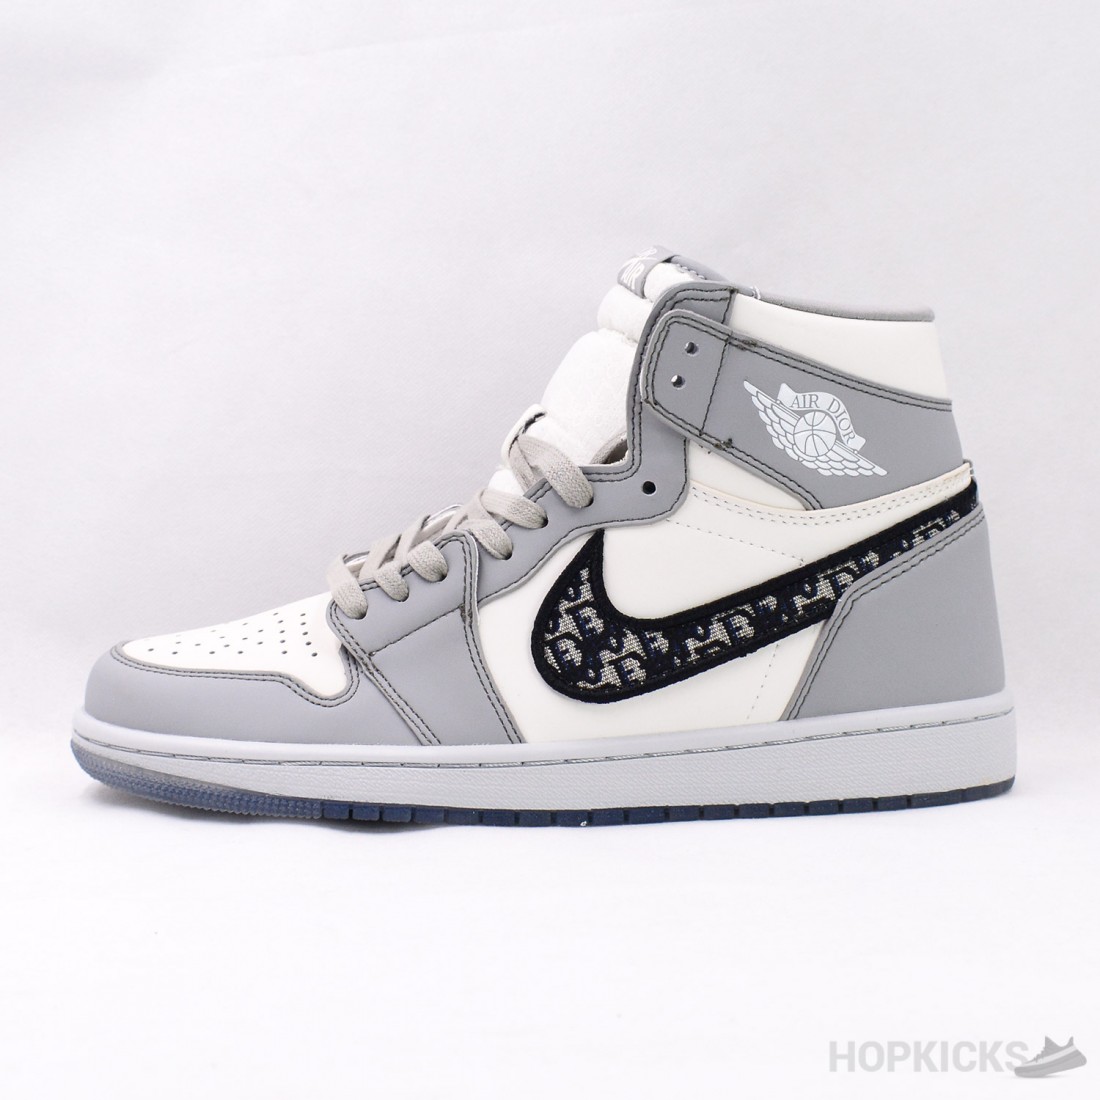 Young lady conversion Understanding Buy Online Dior X Air Jordan 1 Retro High [Dot Perfect Version] In Pakistan  | Dior X Air Jordan 1 Retro High Prices In Pakistan